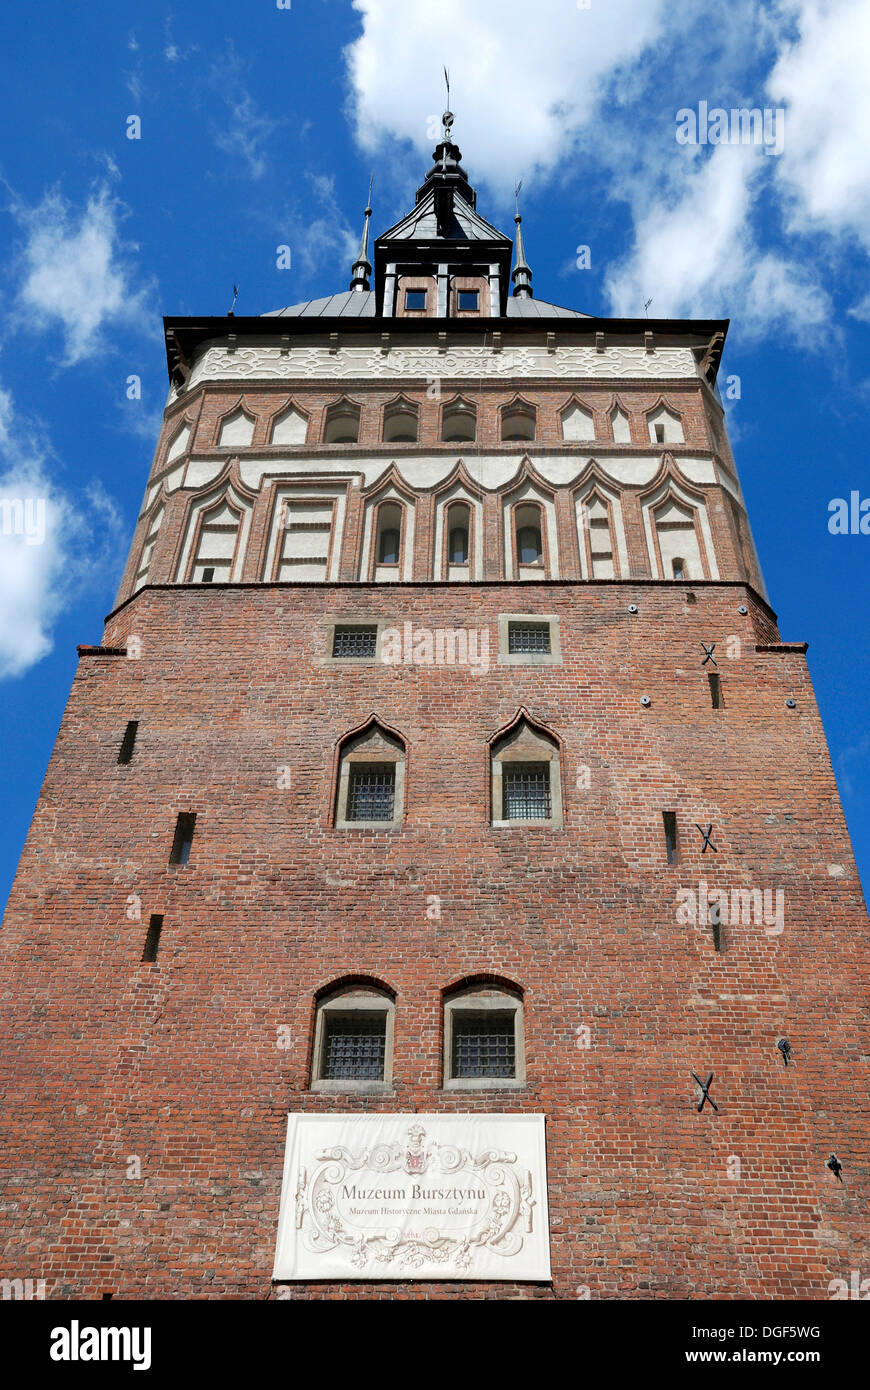 Stock tower with the Amber Museum of Gdansk - Muzeum Bursztynu. Stock Photo